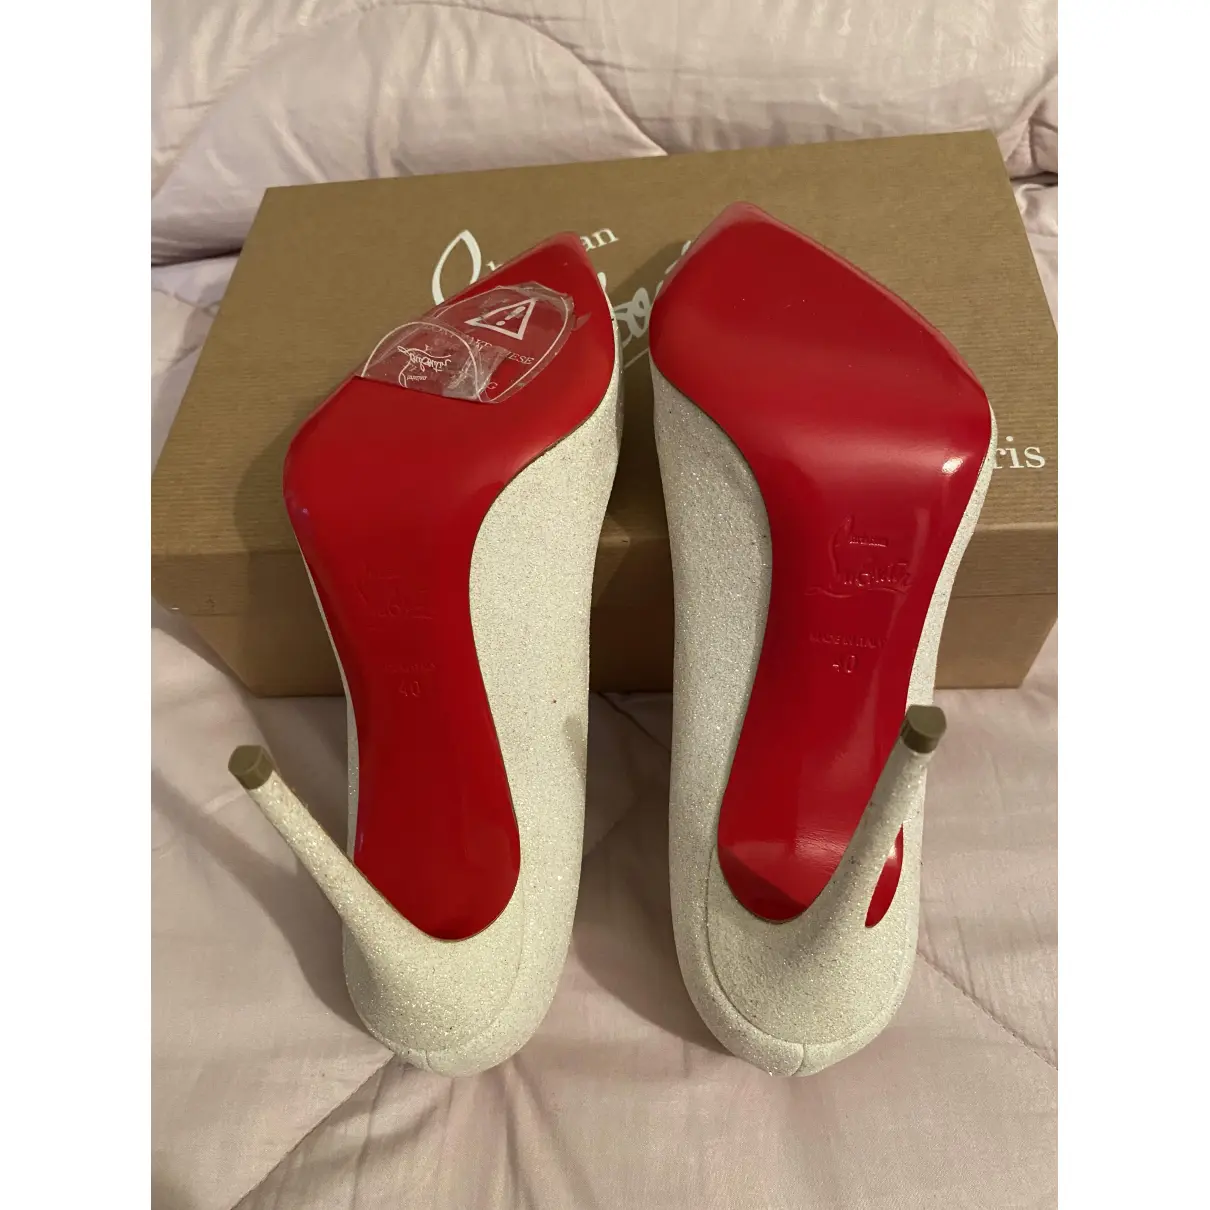 Pigalle cloth heels Christian Louboutin